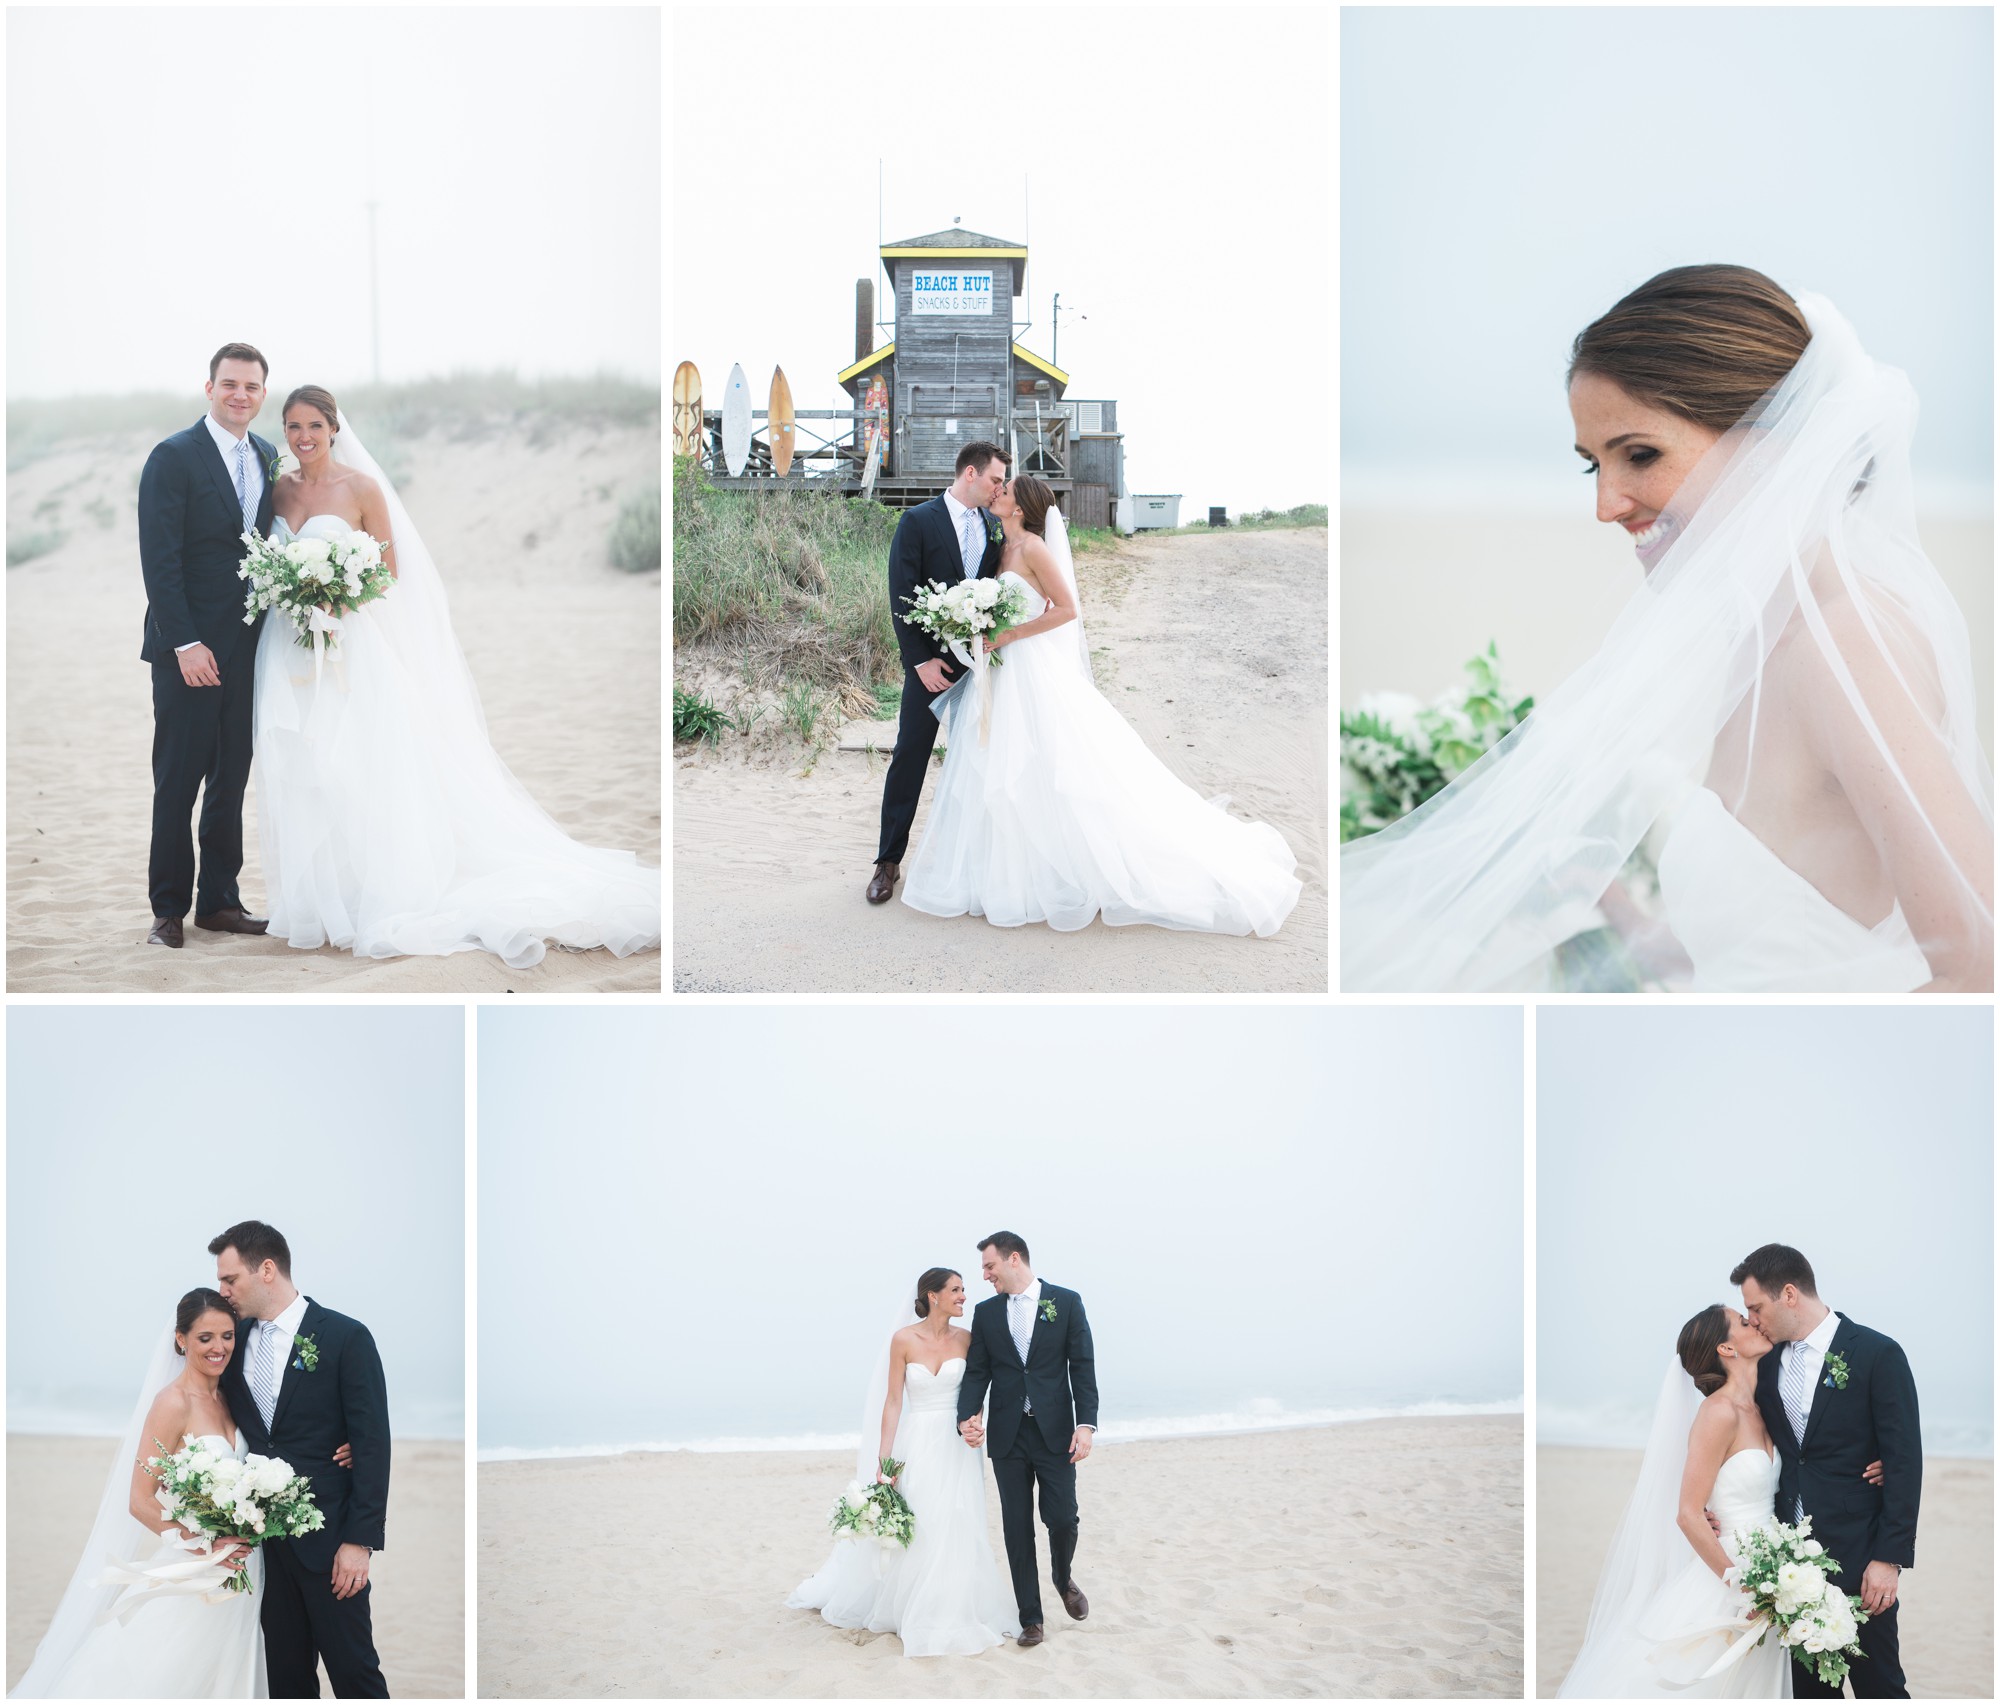 A bride and groom pose on the beach in Amagansett Long Island